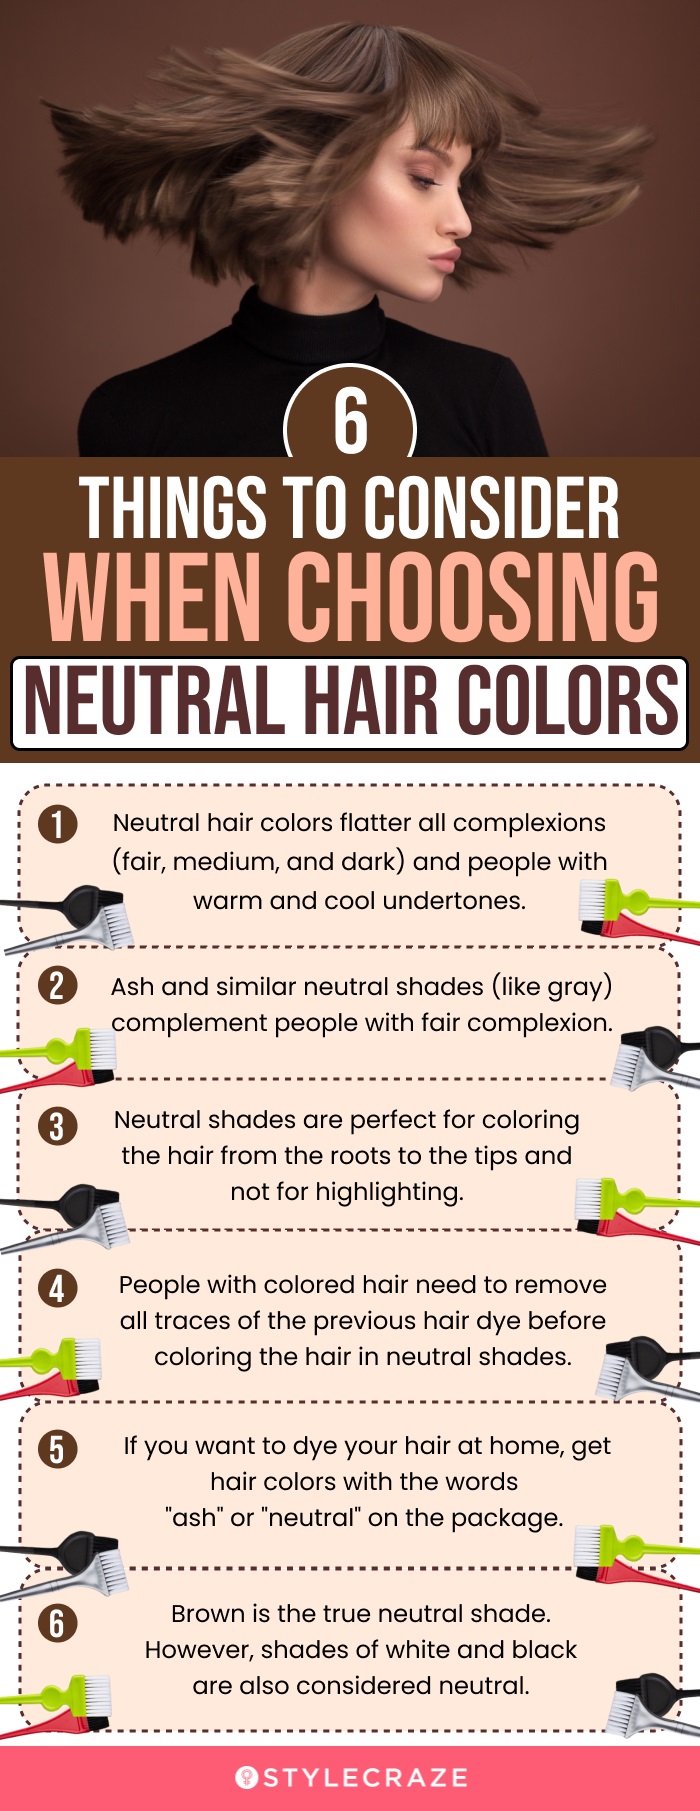 6 things to consider when choosing neutral hair colors (infographic)